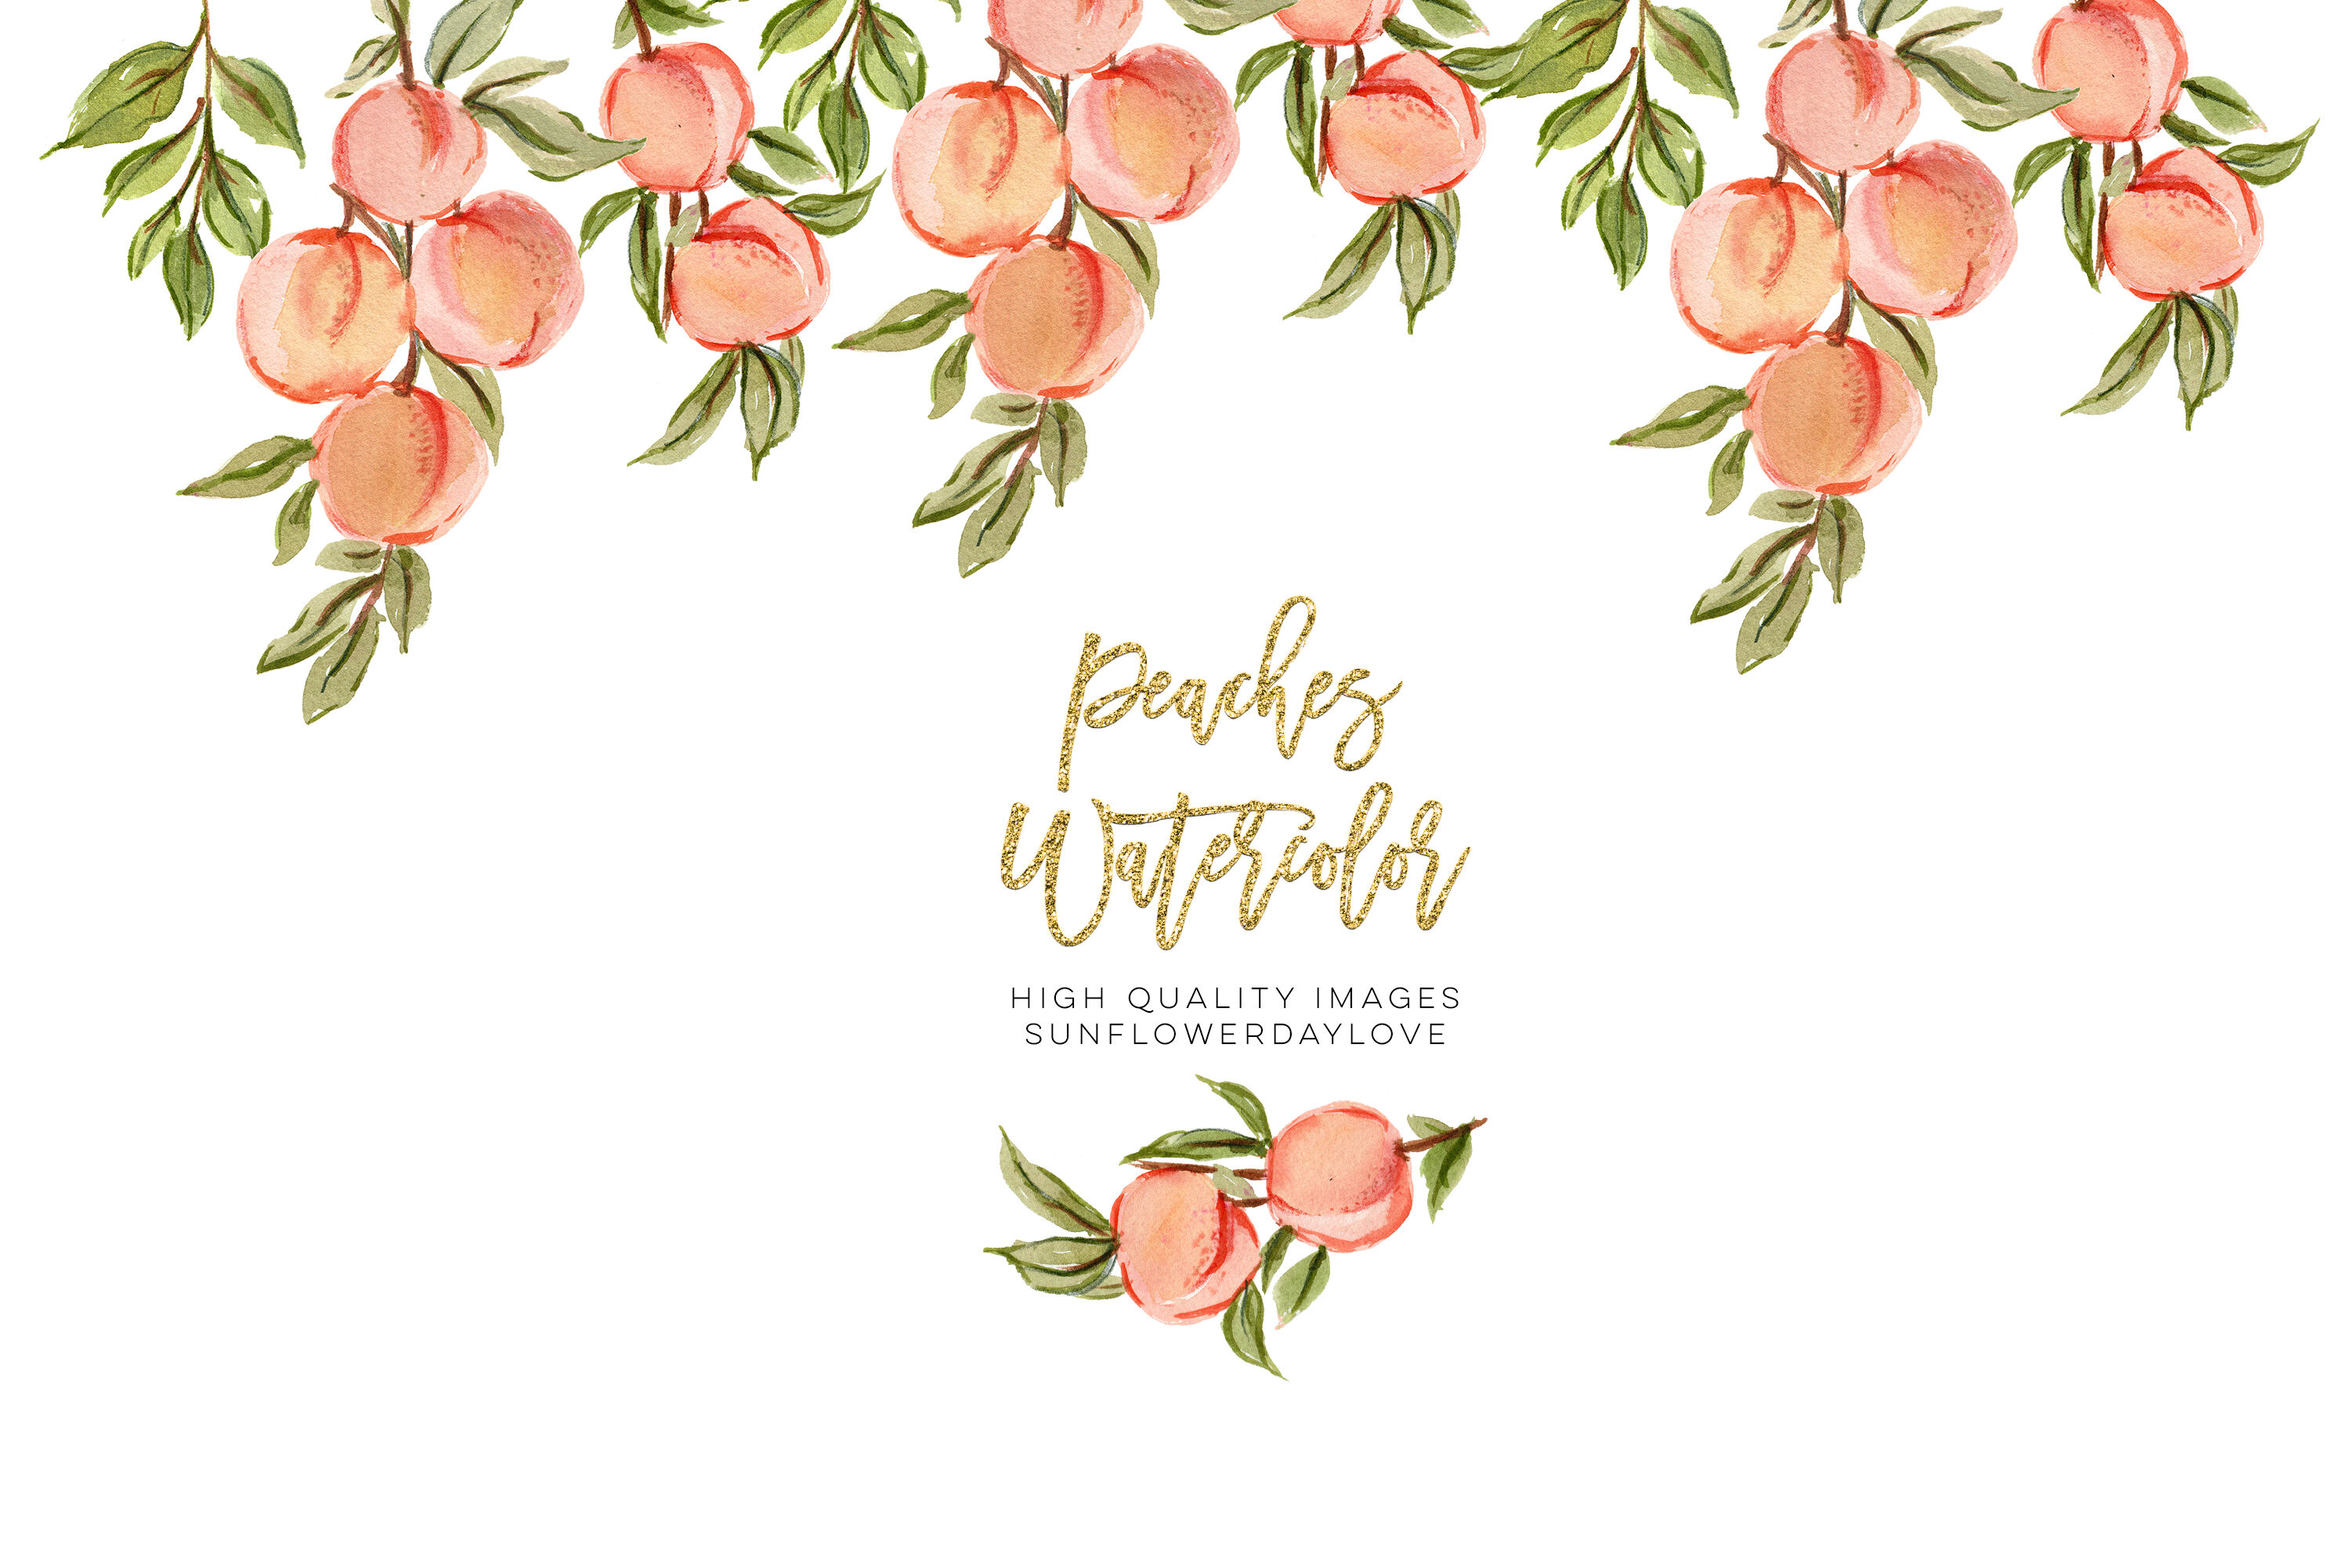 Peaches Watercolor Elements Clipart Peach Fruit Clipart Peach Leaves By Sunflower Day Love 1457